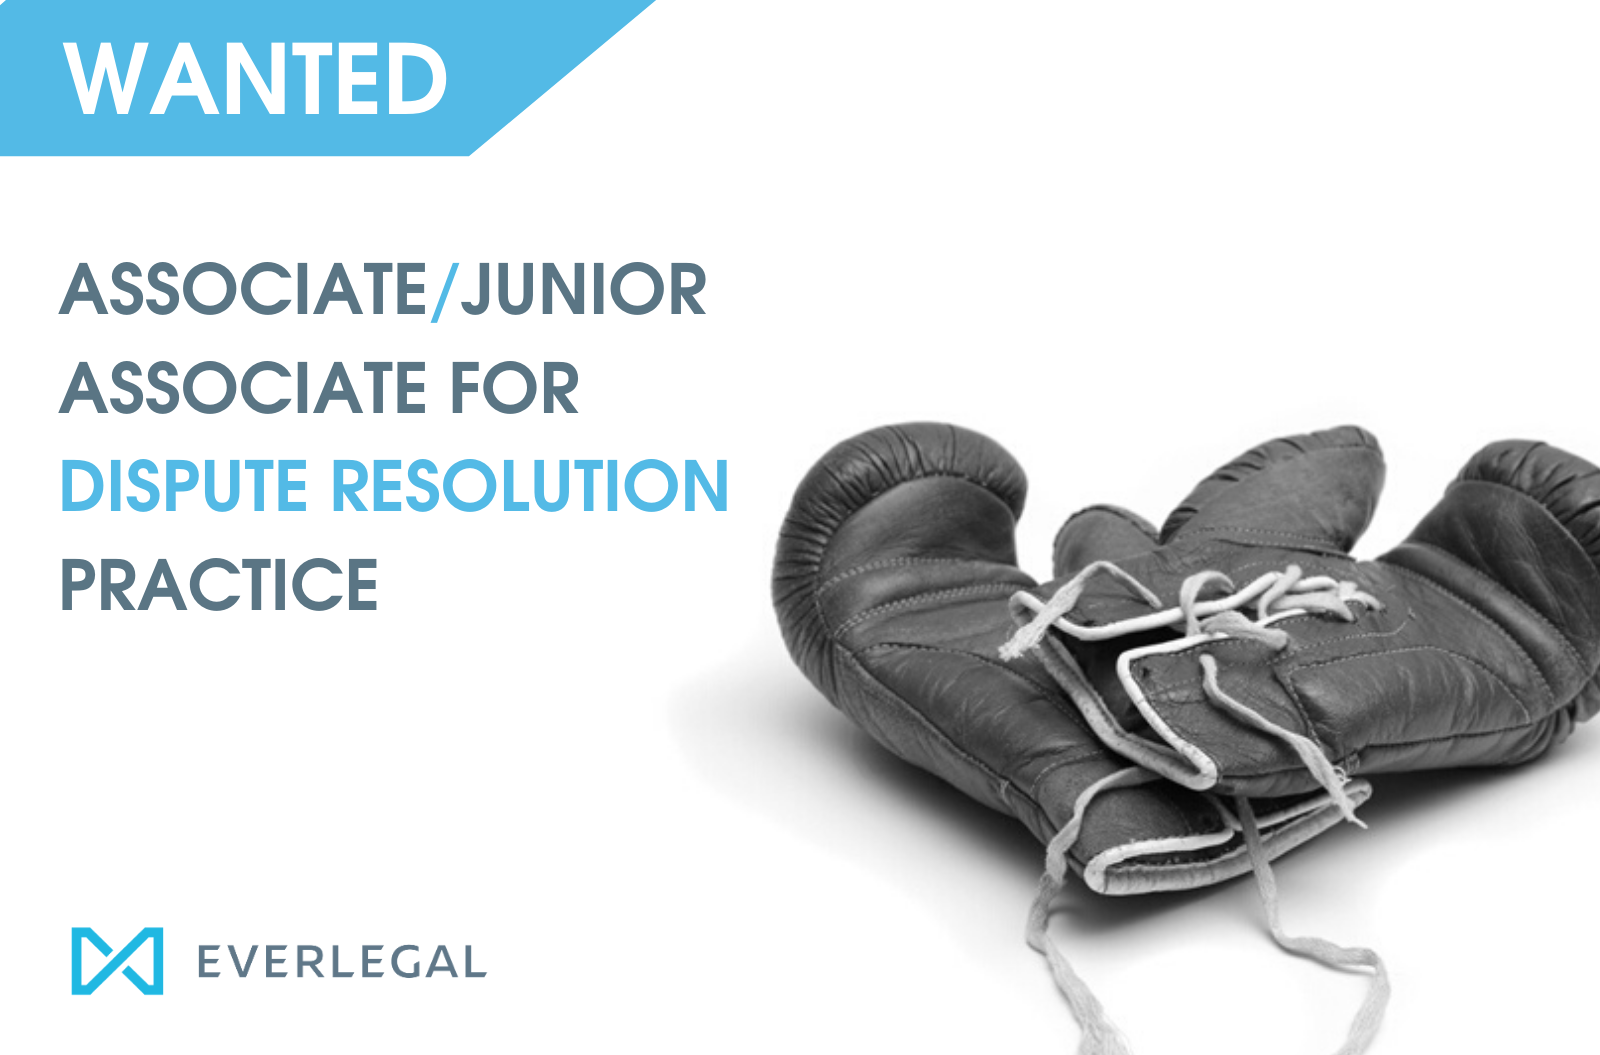 EVERLEGAL is looking for an Associate/Junior Associate for DR Practice